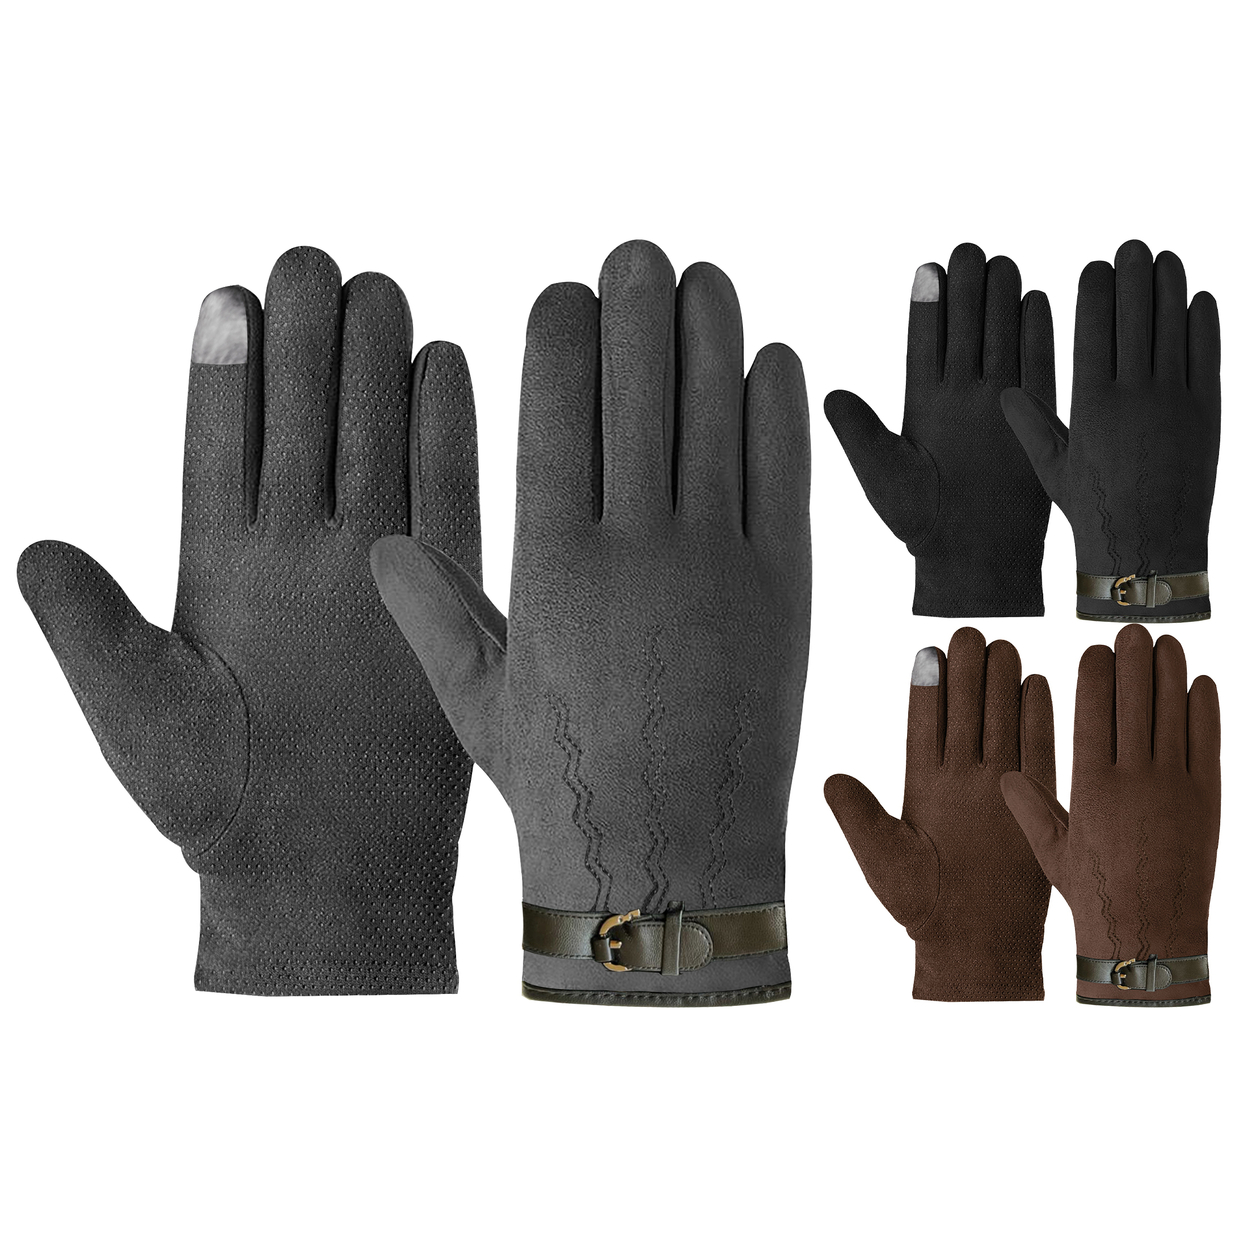 4-Pairs: Winter Warm Soft Lining Weather-Proof Touchscreen Suede Insulated Gloves